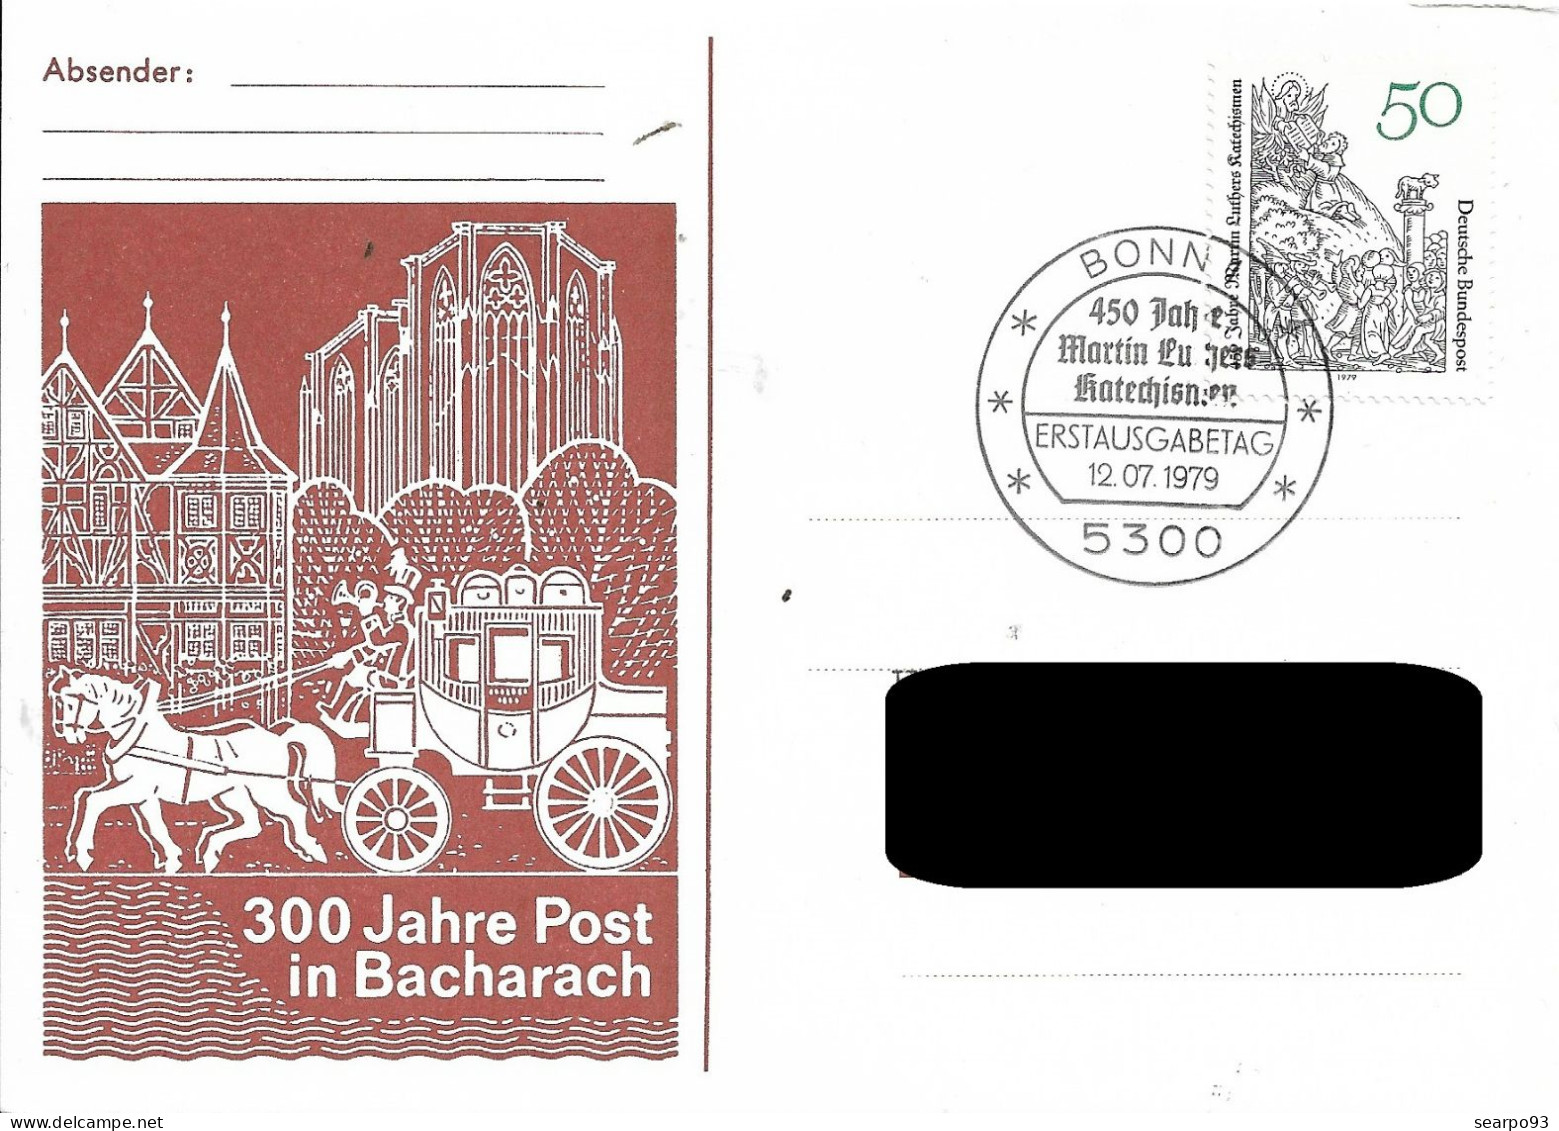 GERMANY. FDC. 450TH ANNIVERSARY OF MARTIN LUTHER'S CATECHISM. 1979 - 1971-1980